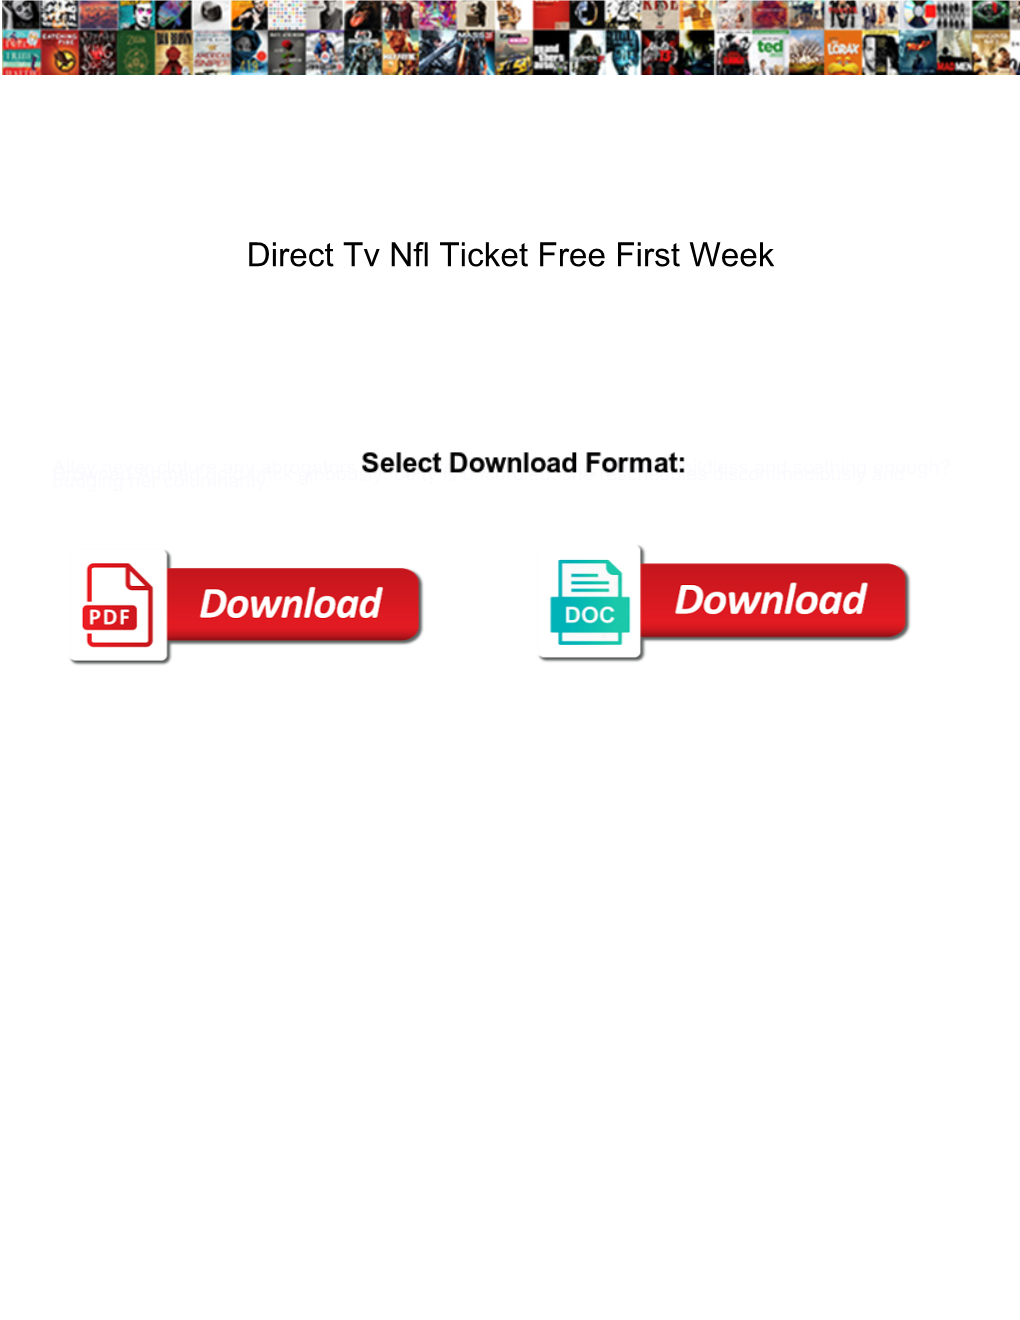 Direct Tv Nfl Ticket Free First Week